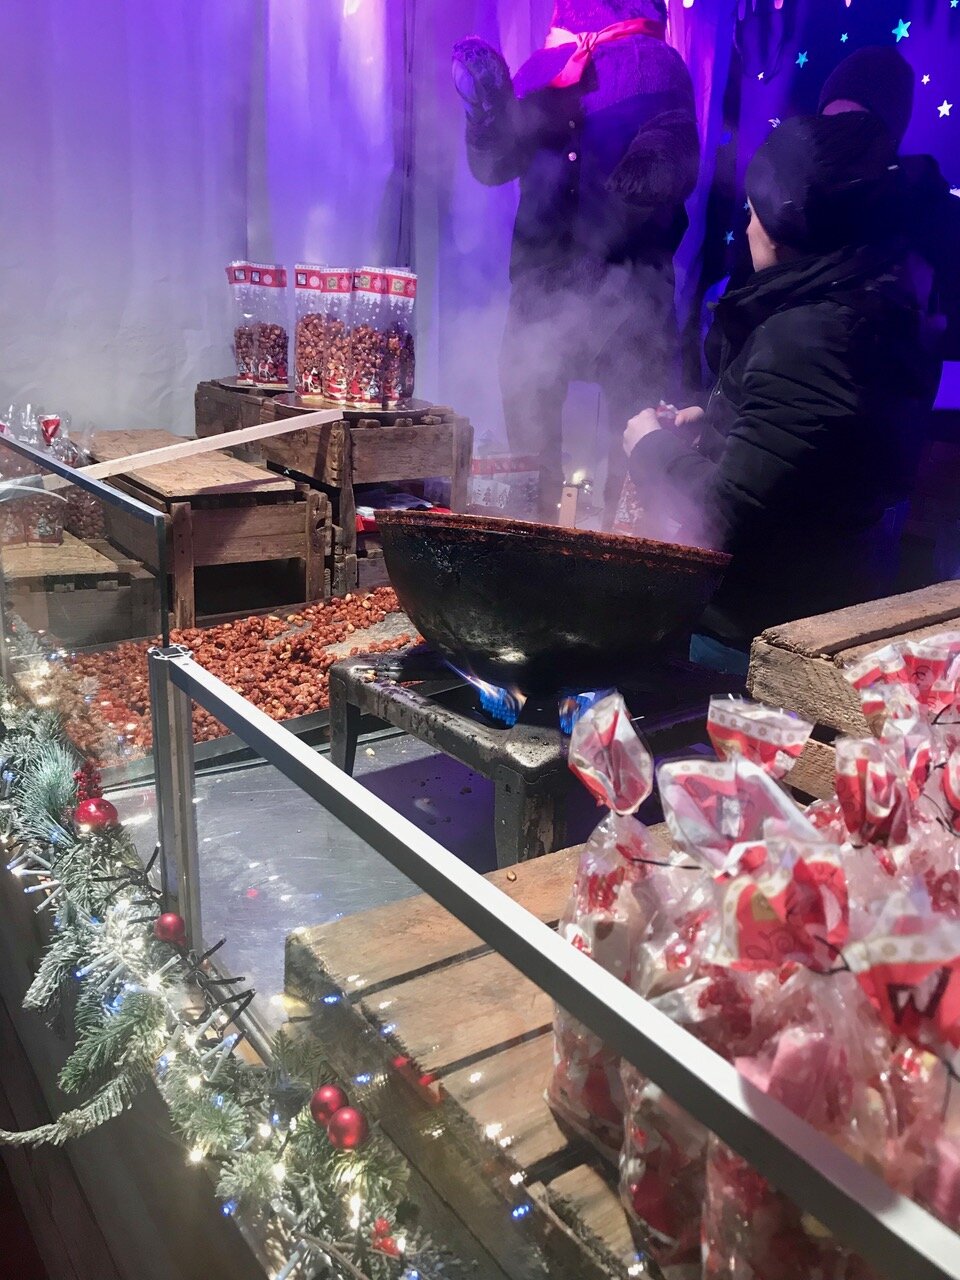 Chestnuts and Almonds roasting on an open fire at a Christmas Market in Belgium. You can almost see the aromas in the cold air. 